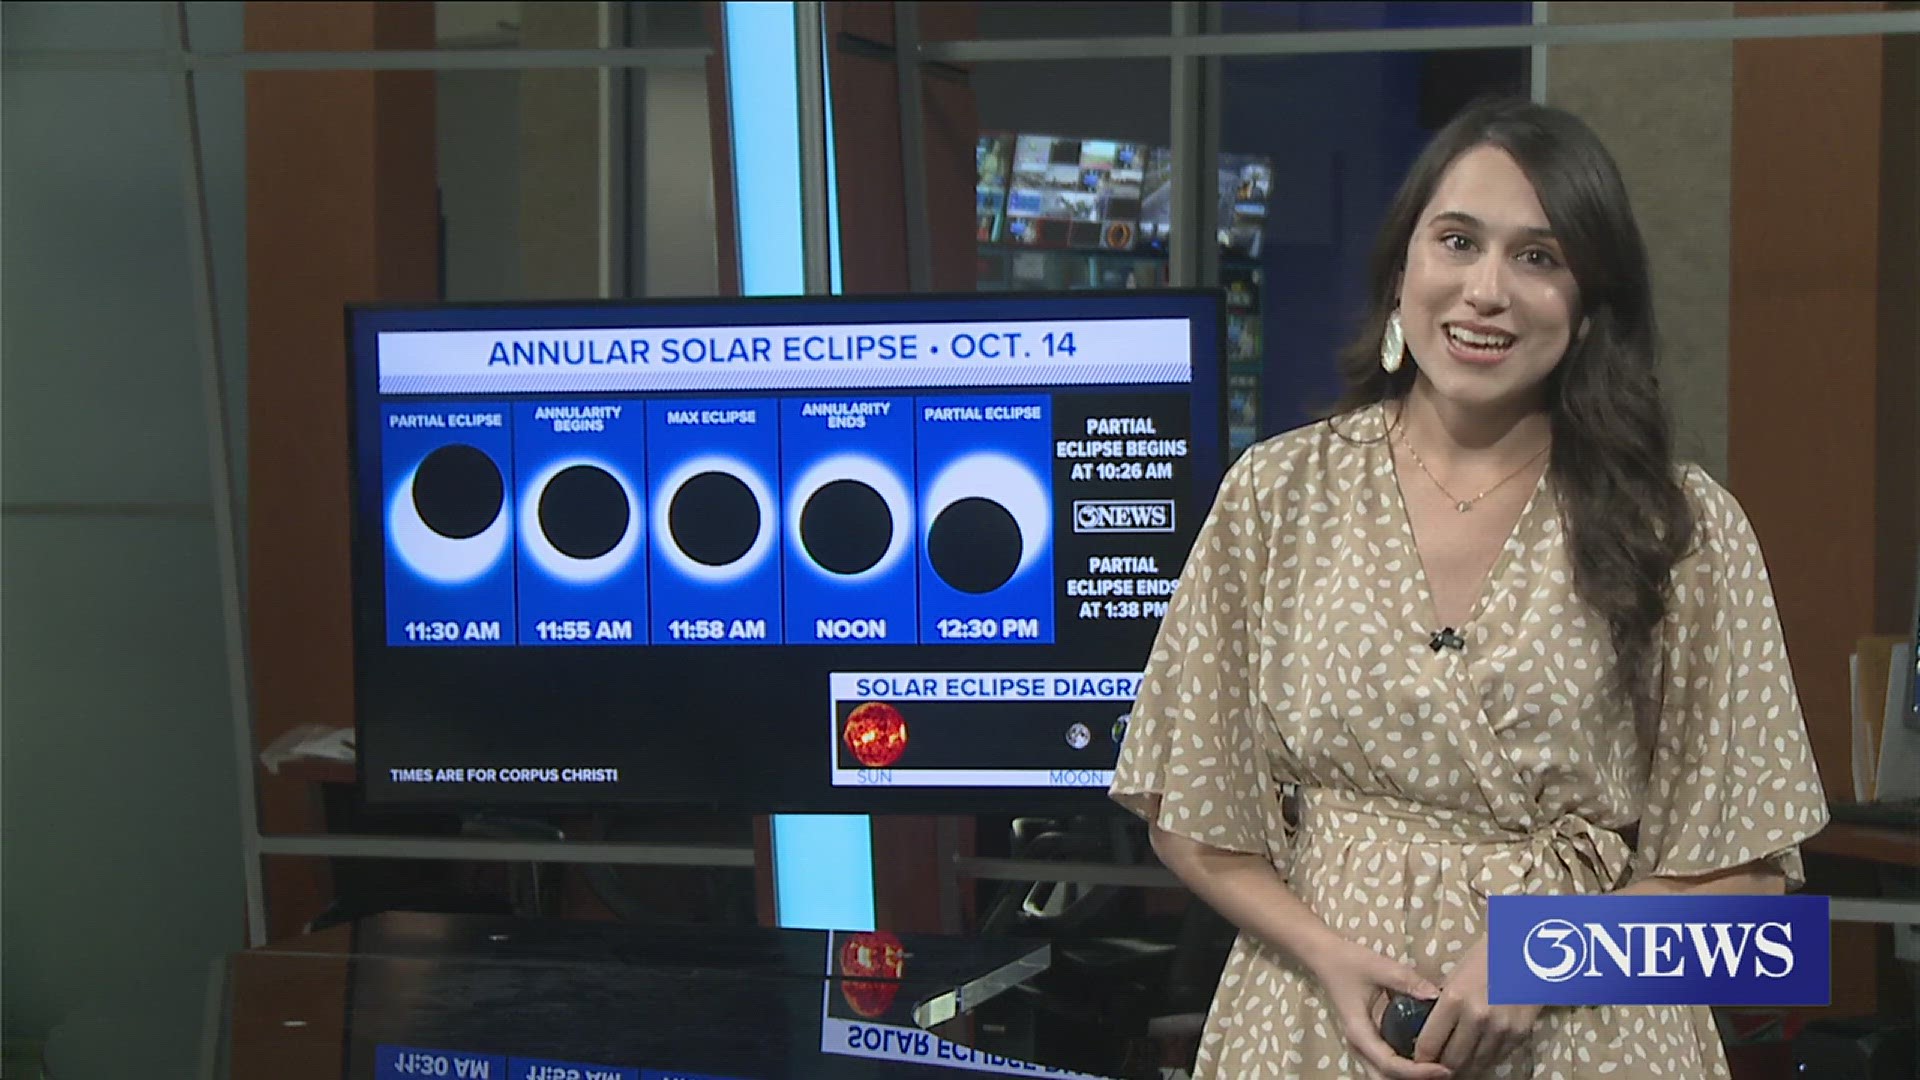 Corpus Christi and much of the Coastal Bend will be in prime position to witness an annular solar eclipse on October 14.